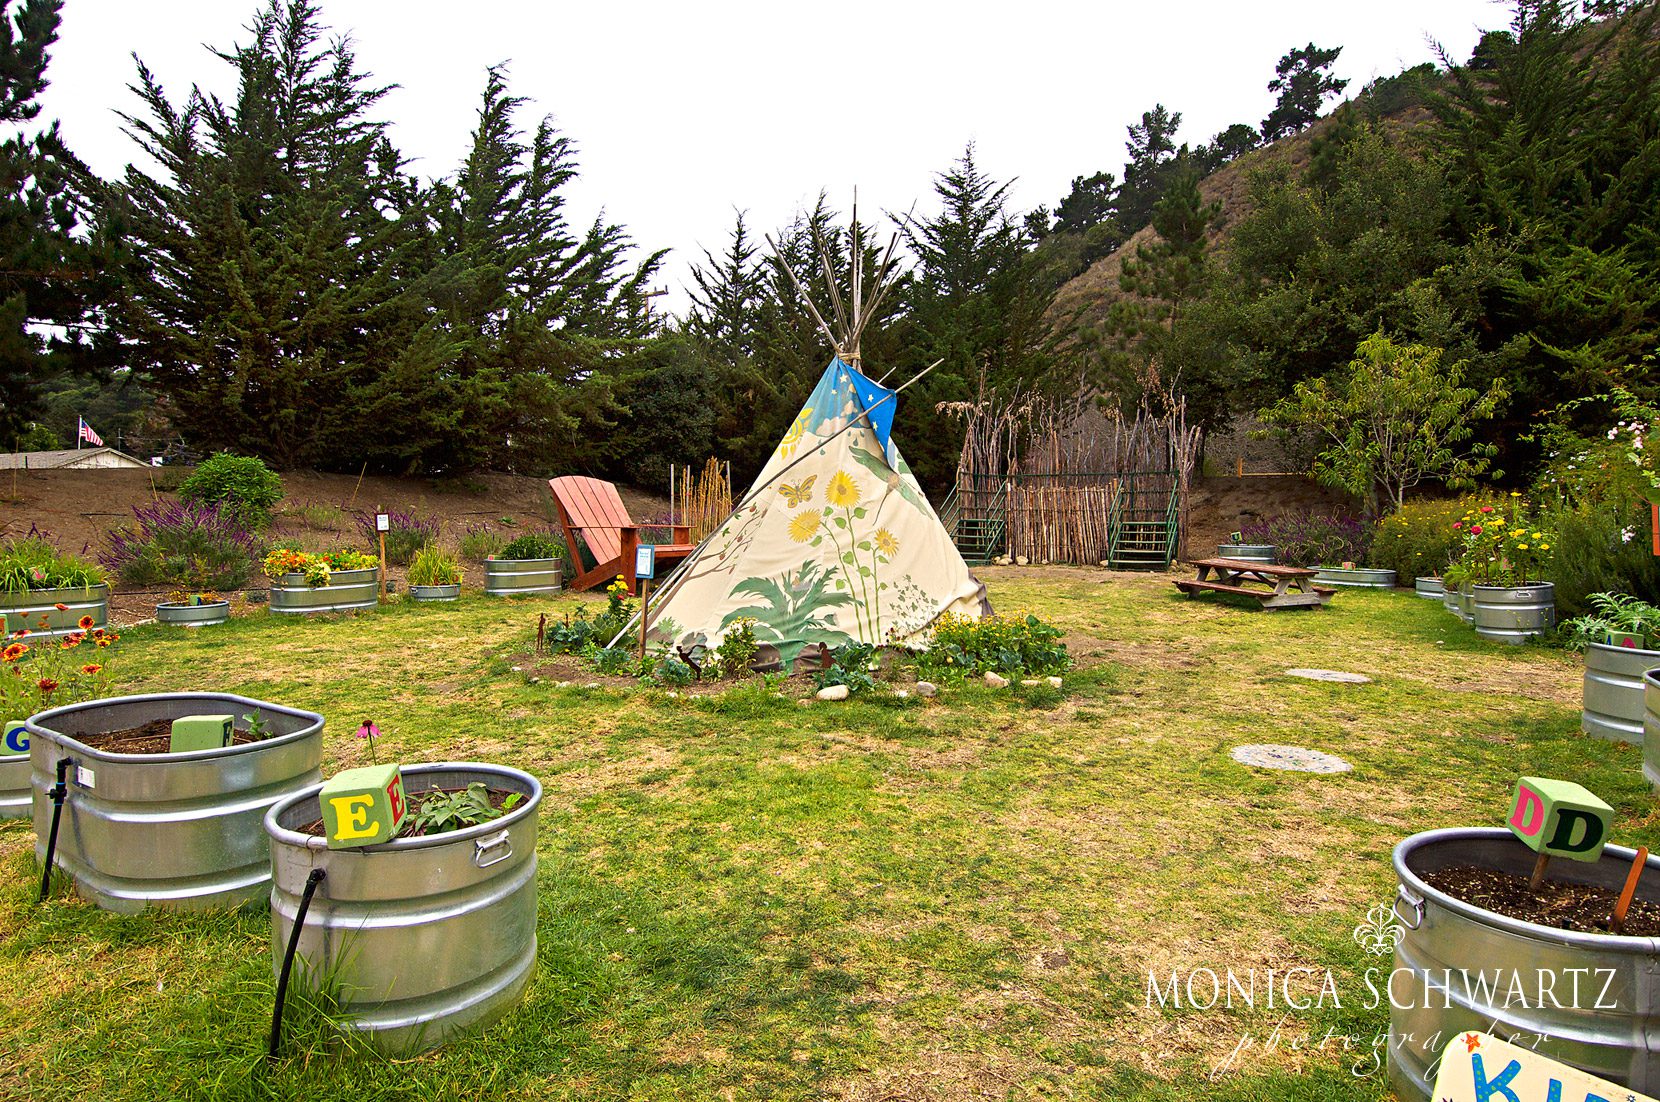 Teepee-at-Earthbound-Farms-in-Carmel-Valley-California